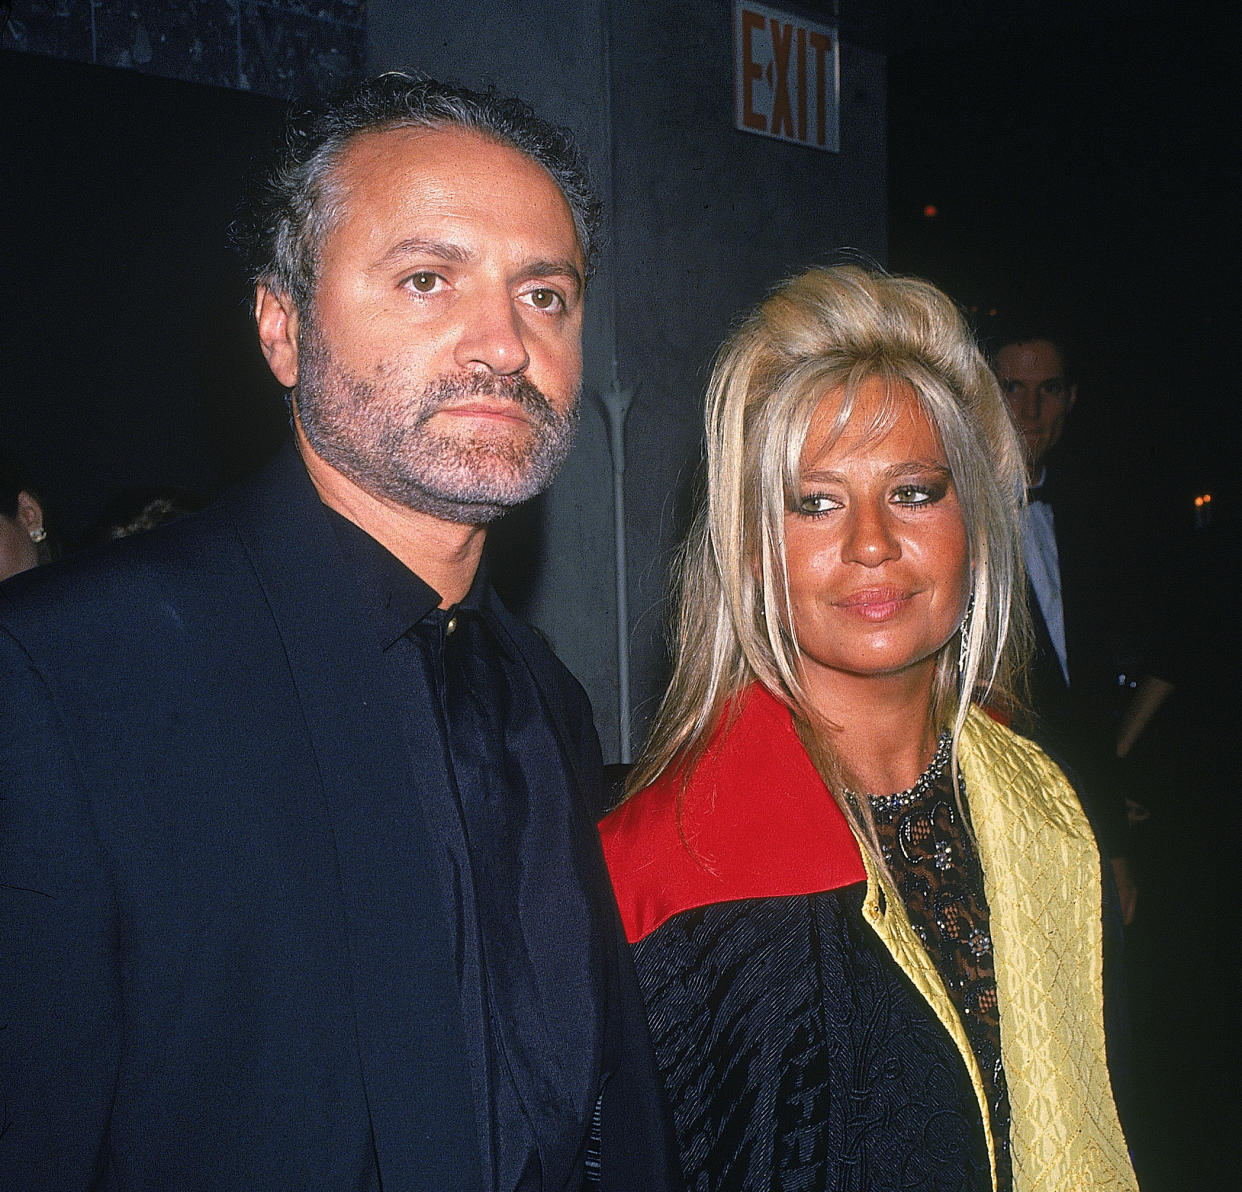 Here’s how to watch “The Versace Murder” movie, if you’re obsessed with this true crime right now